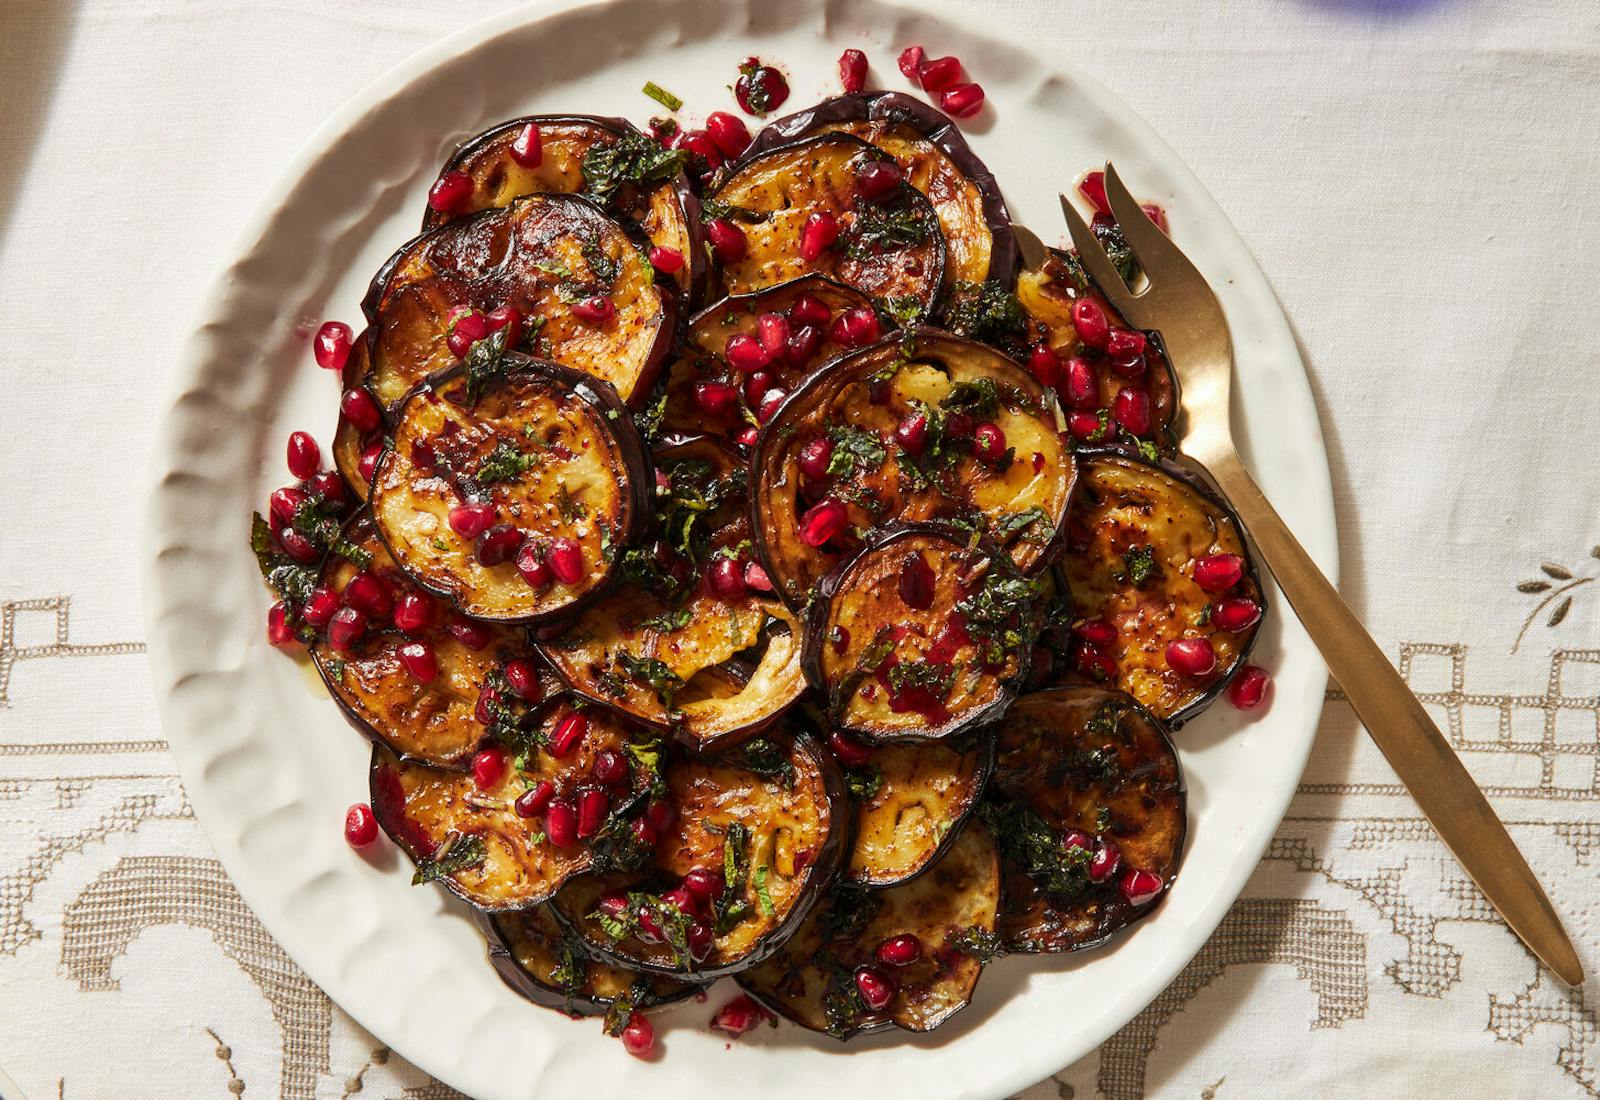 Fried eggplant with mint vinaigrette and pomegranate kernels on white plate atop white patterned tablecloth.